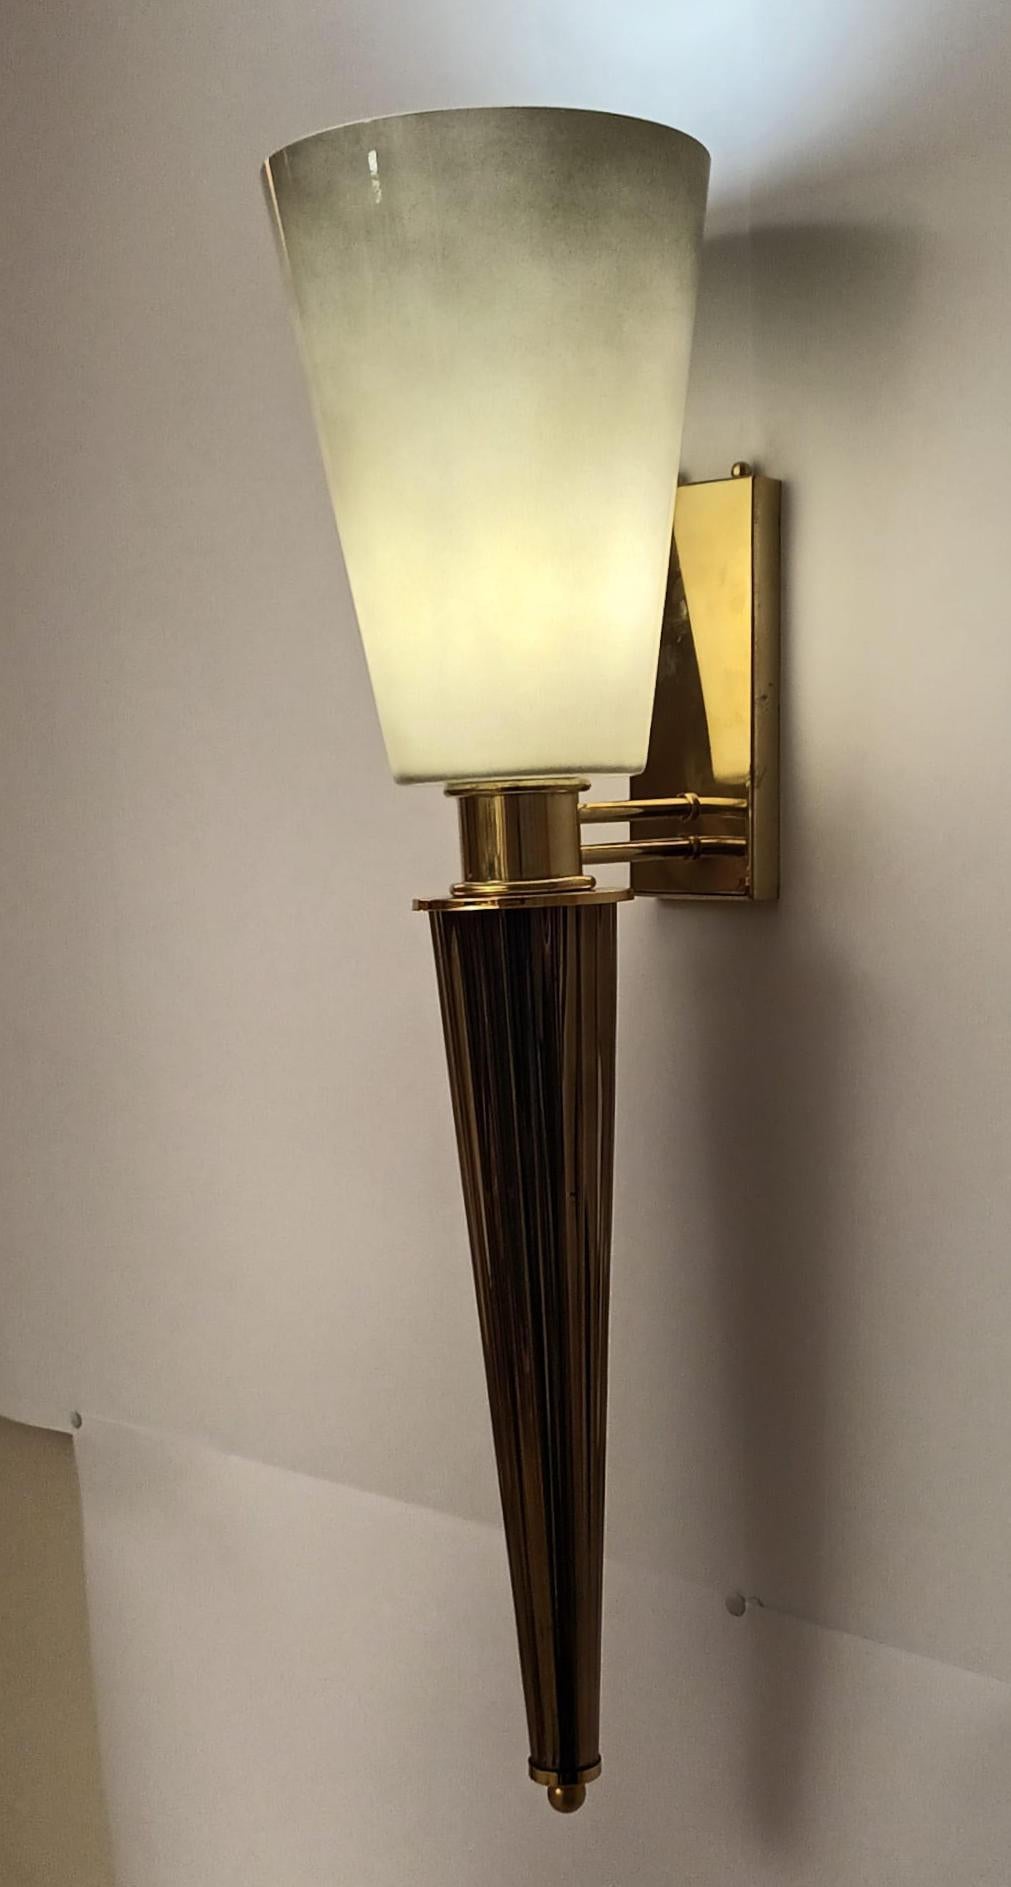 Contemporary Pair of Smoky Gray Torchere Sconces - 2 Pairs Available